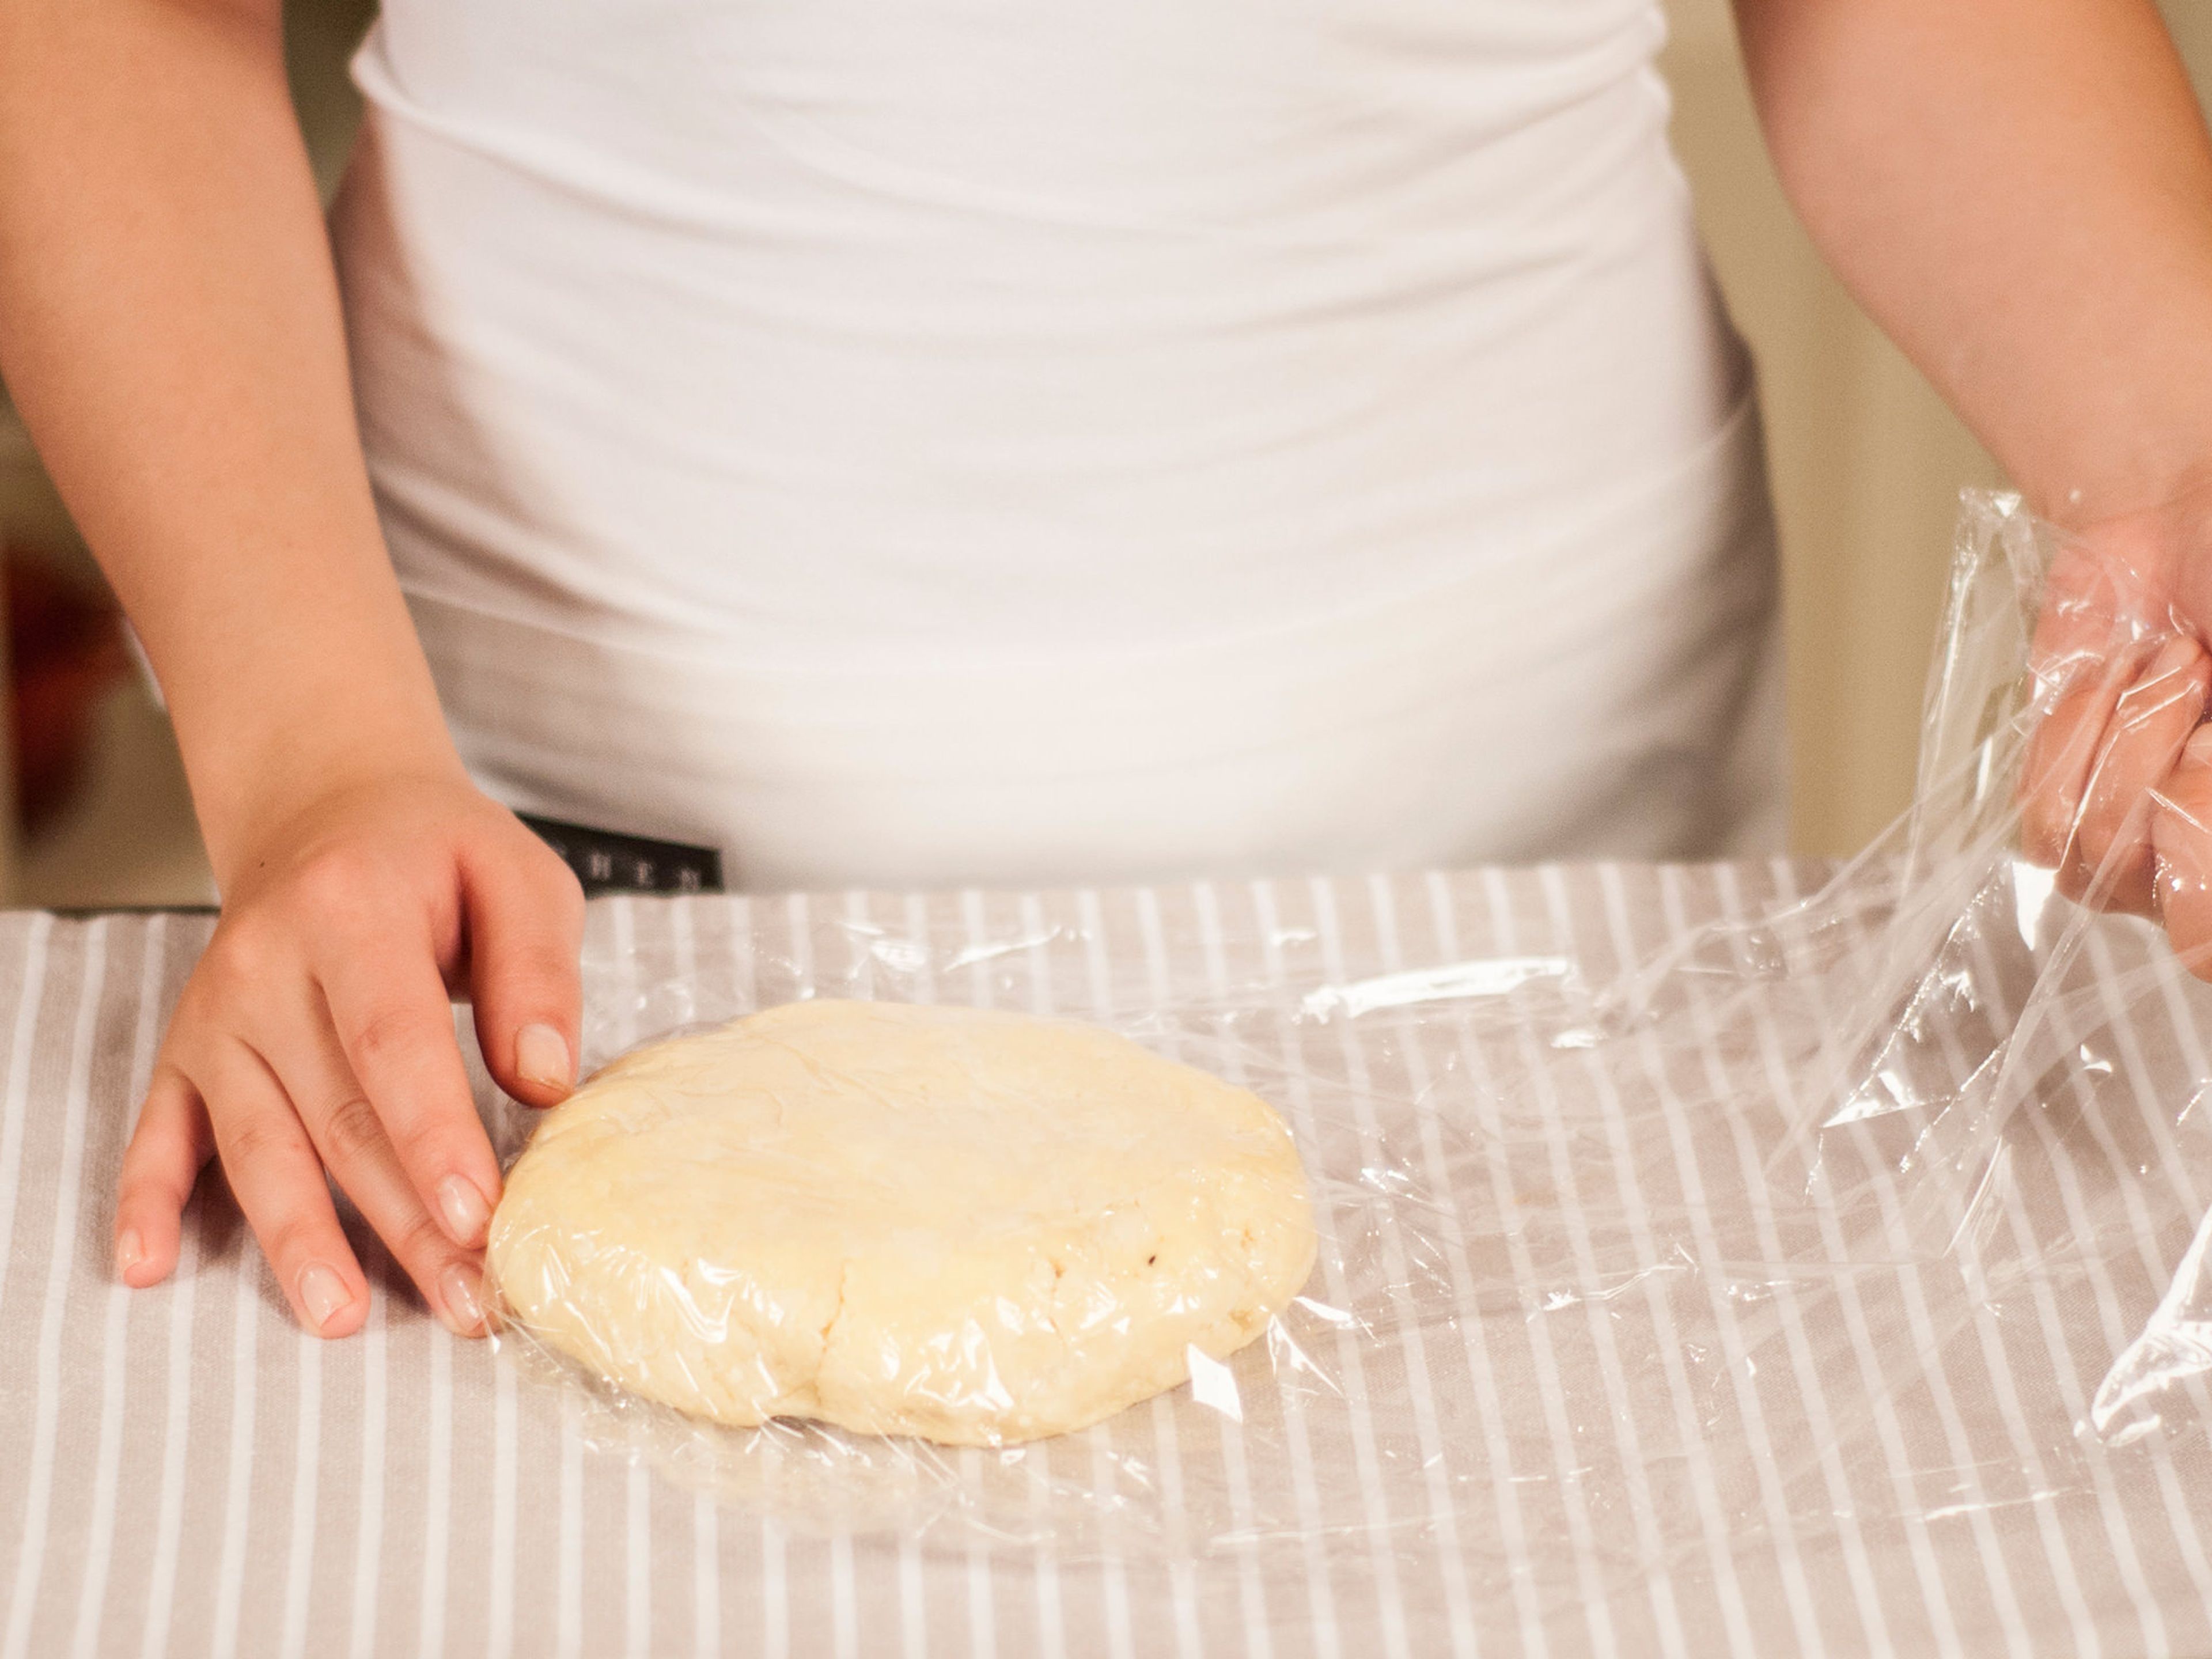 Wrap dough in plastic wrap and cool for approx. 30 – 35 min. Preheat oven to 200°C/ 400°F.